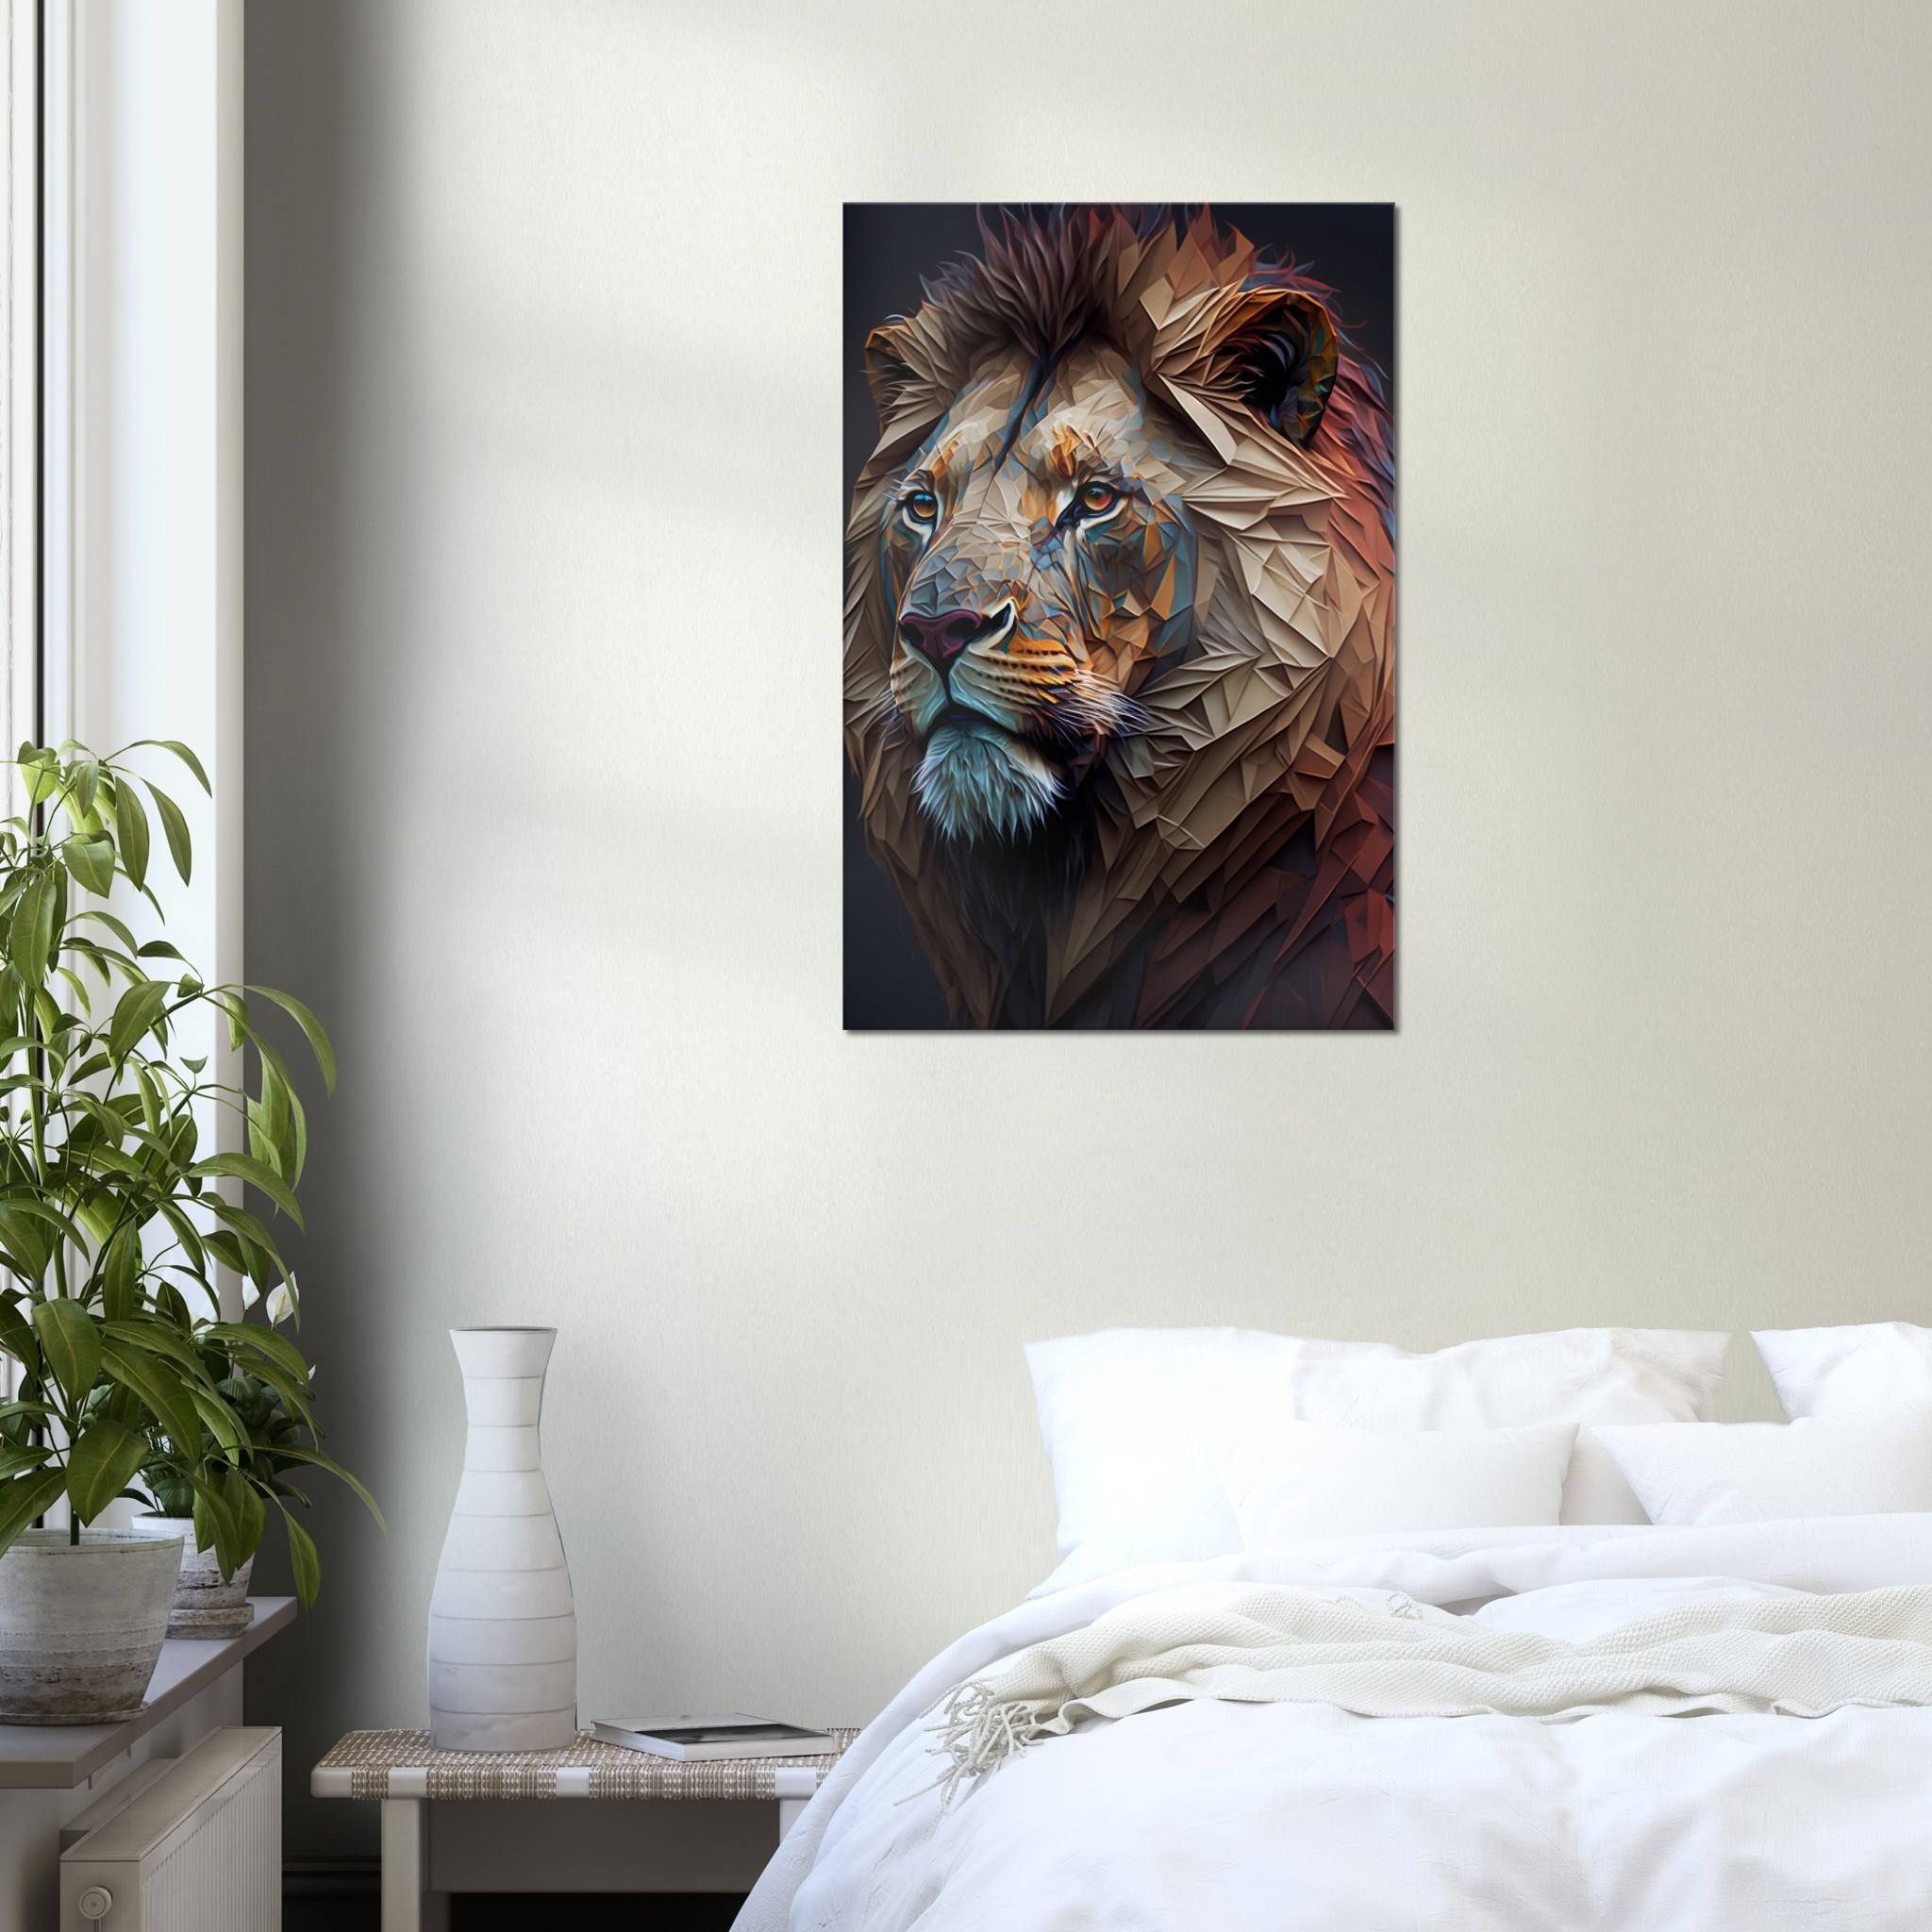 Lion Close to Reality 6 / 50 x 75 cm (Canvas Print) Canvas Print Canvas reproduction The Pianist Print On Demand Fabled Gallery https://fabledgallery.art/product/lion-close-to-reality-6-50-x-75-cm-canvas-print/